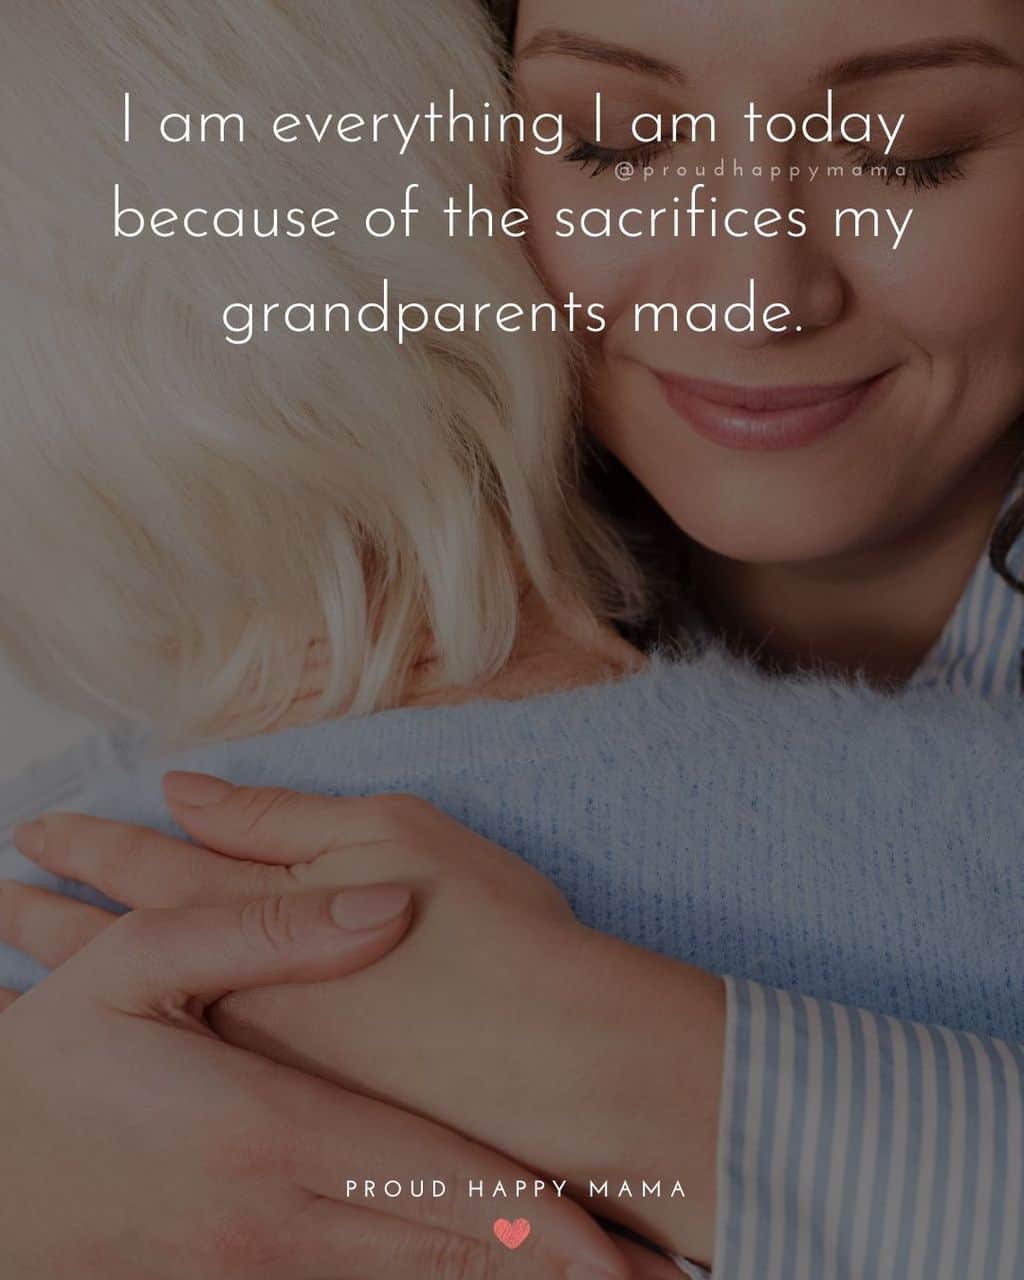 Grandparent Quotes – I am everything I am today because of the sacrifices my grandparents made.’